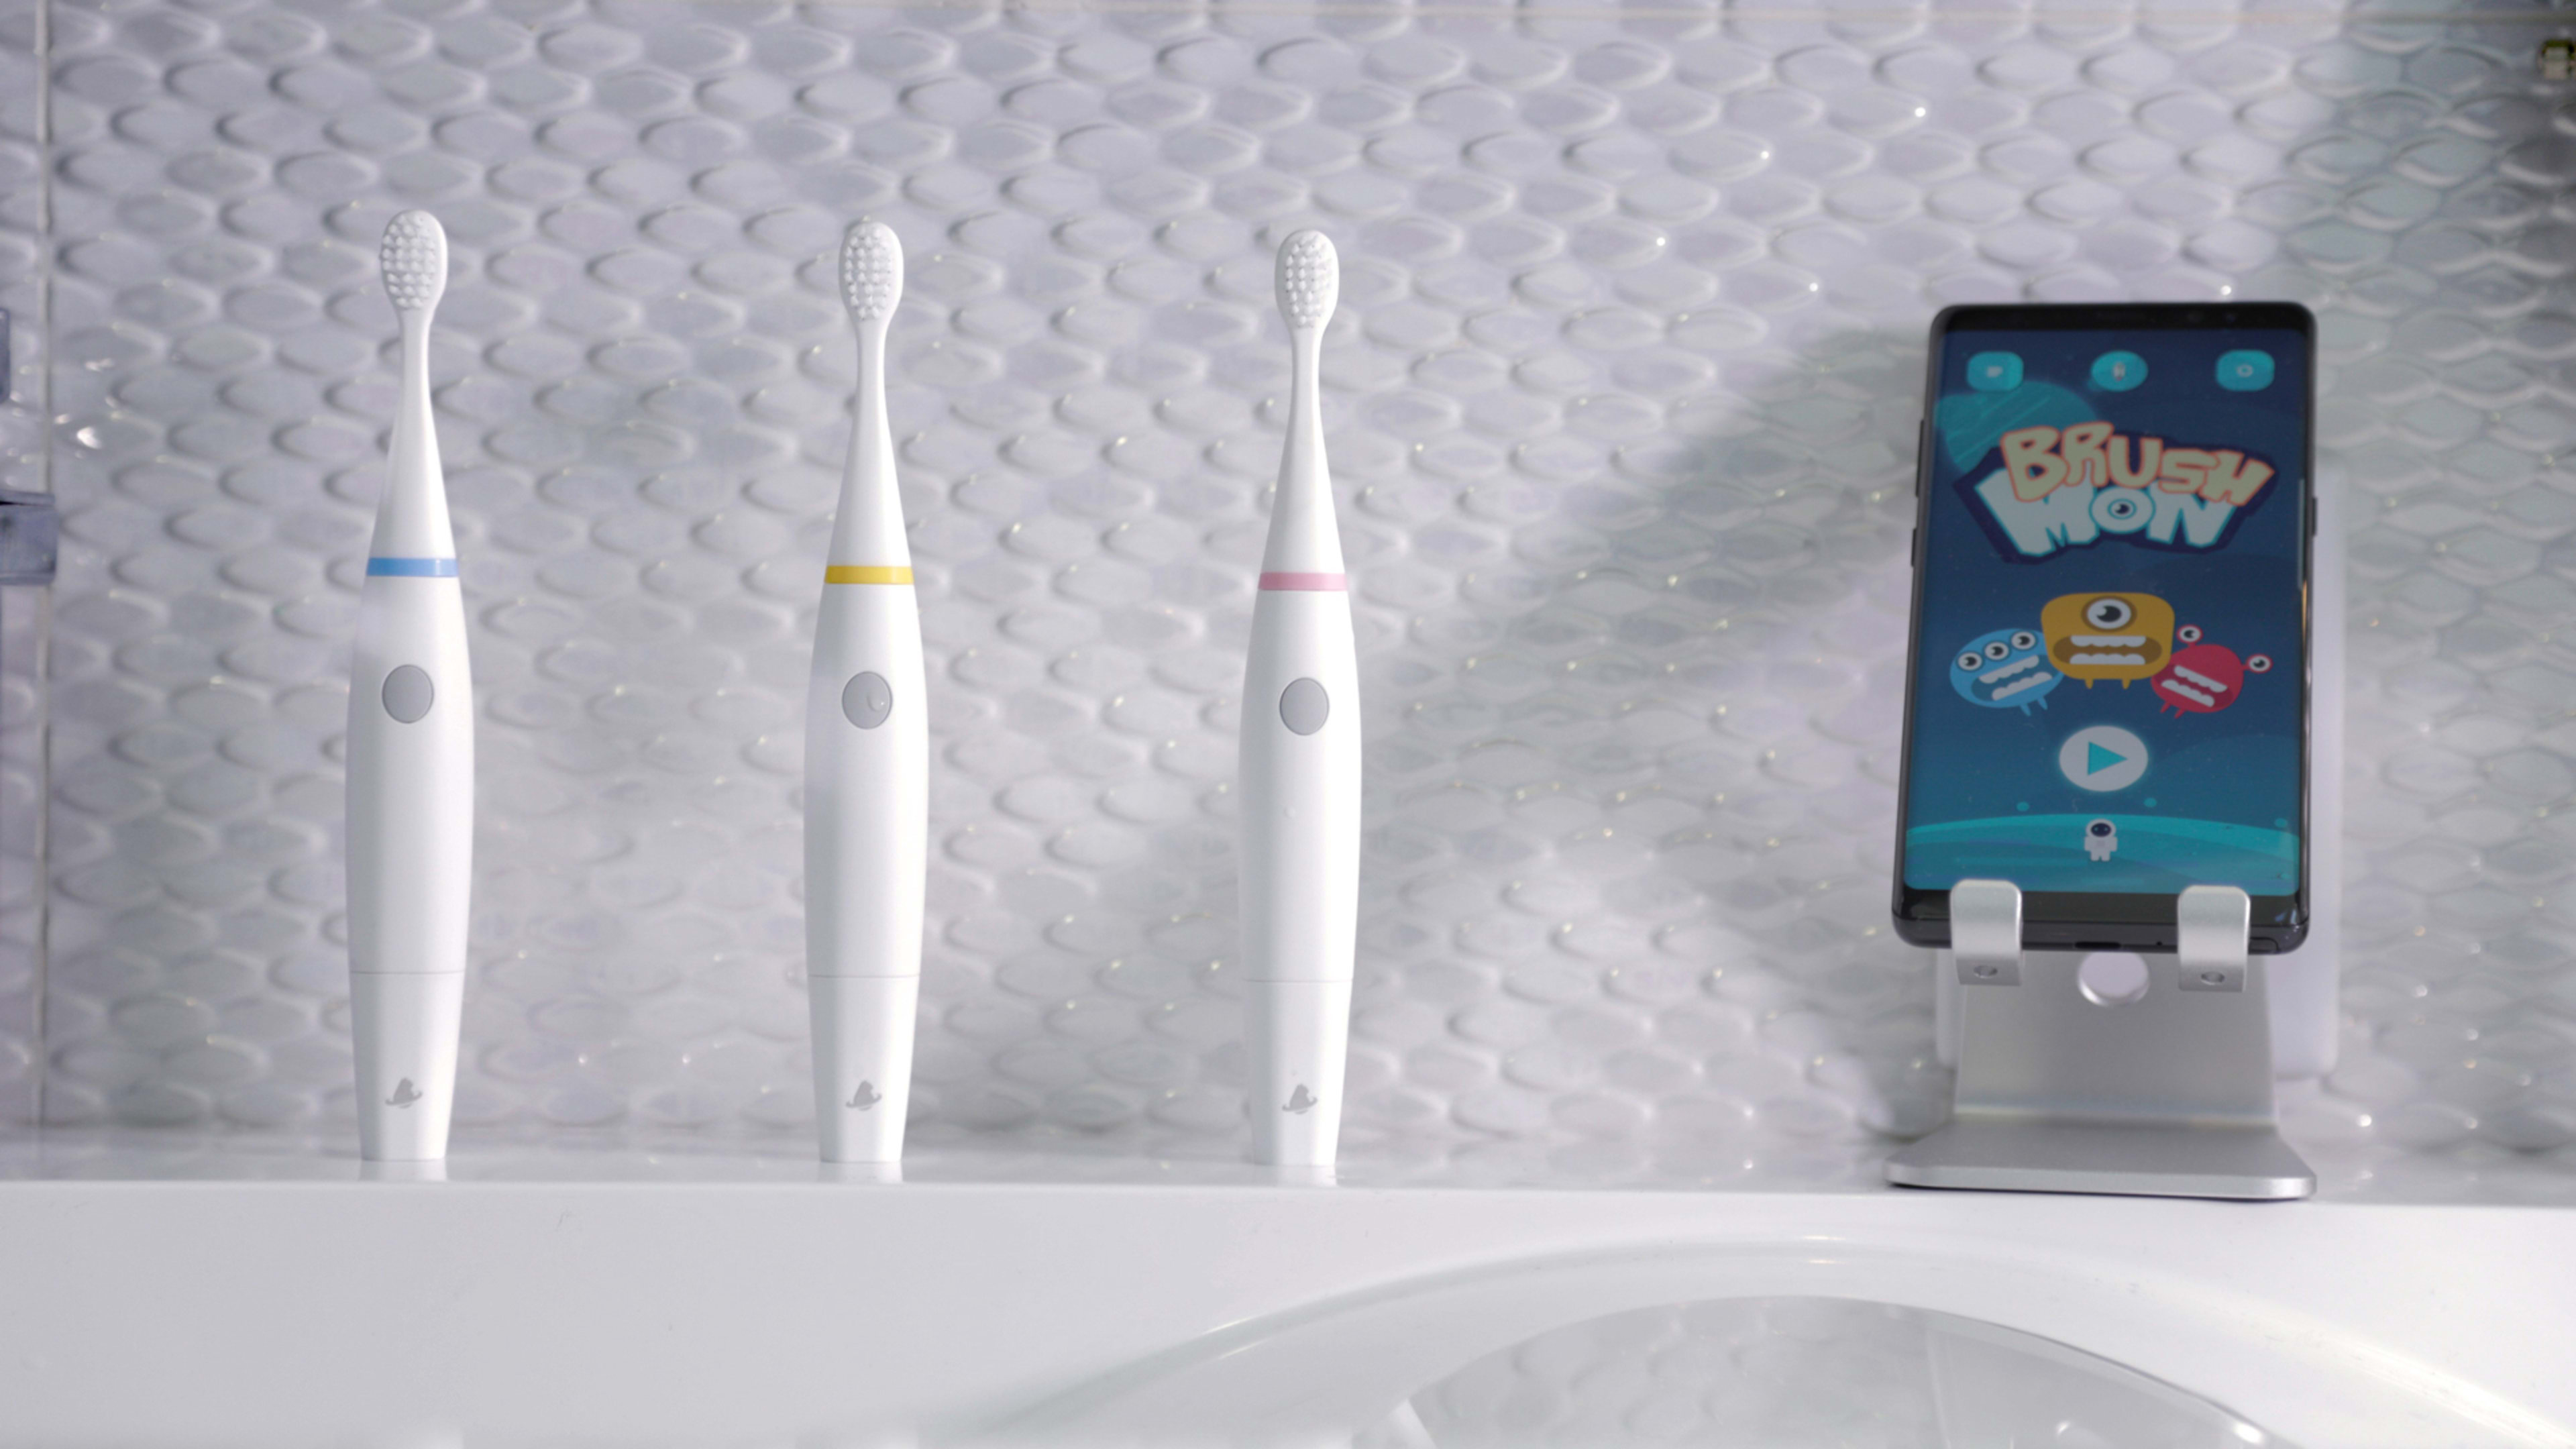 This miraculous AR toothbrush could put an end to your toddler’s toothy tantrums